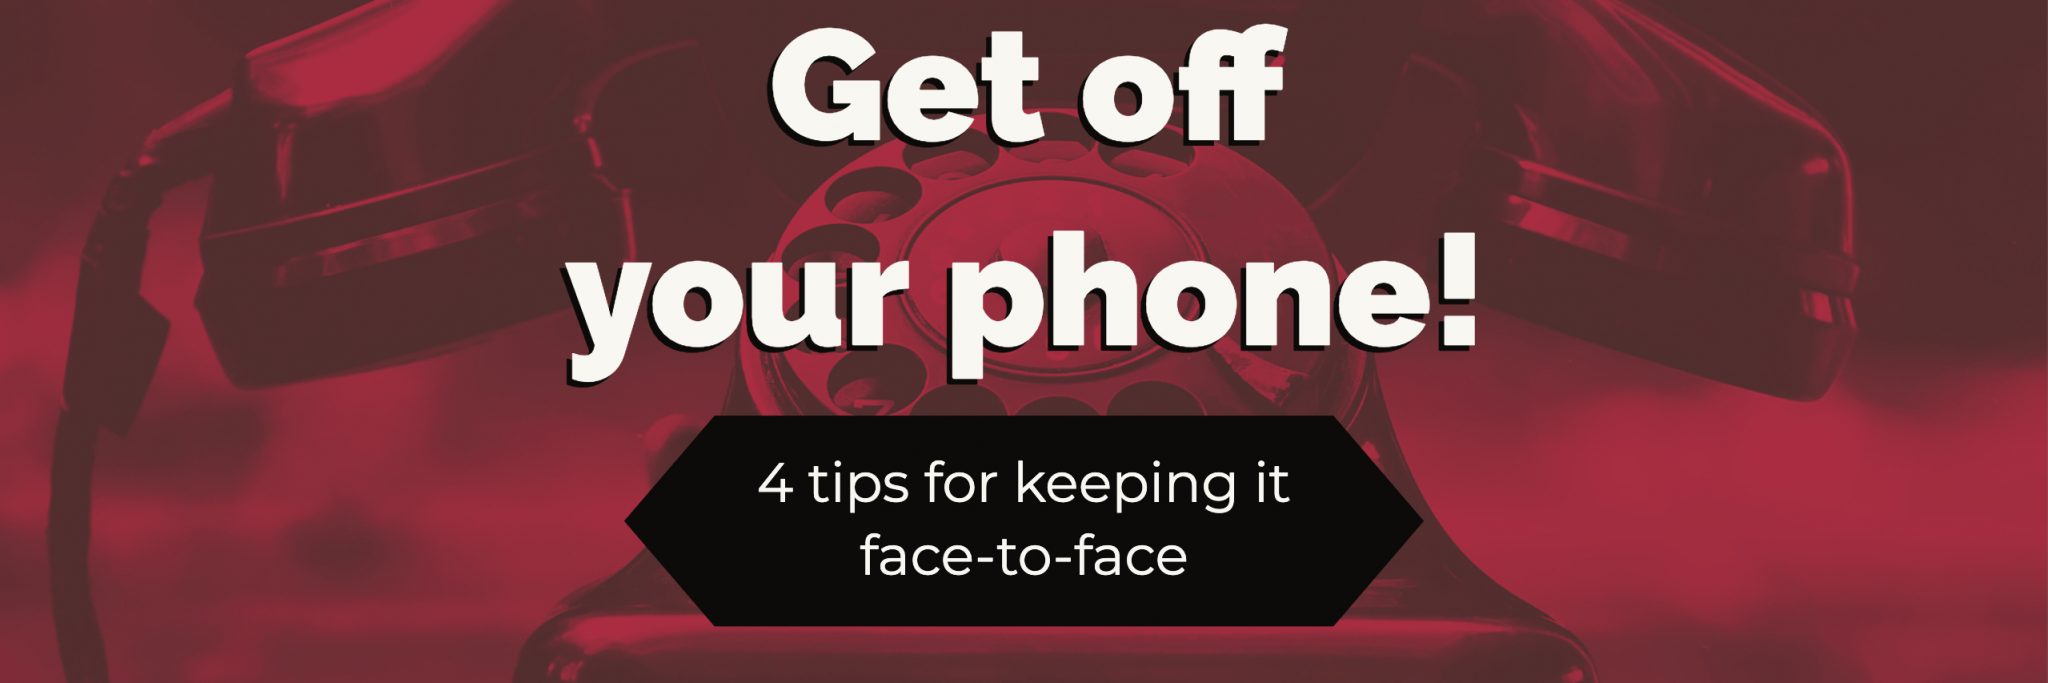 Get off your phone! 4 tips for keeping it face-to-face